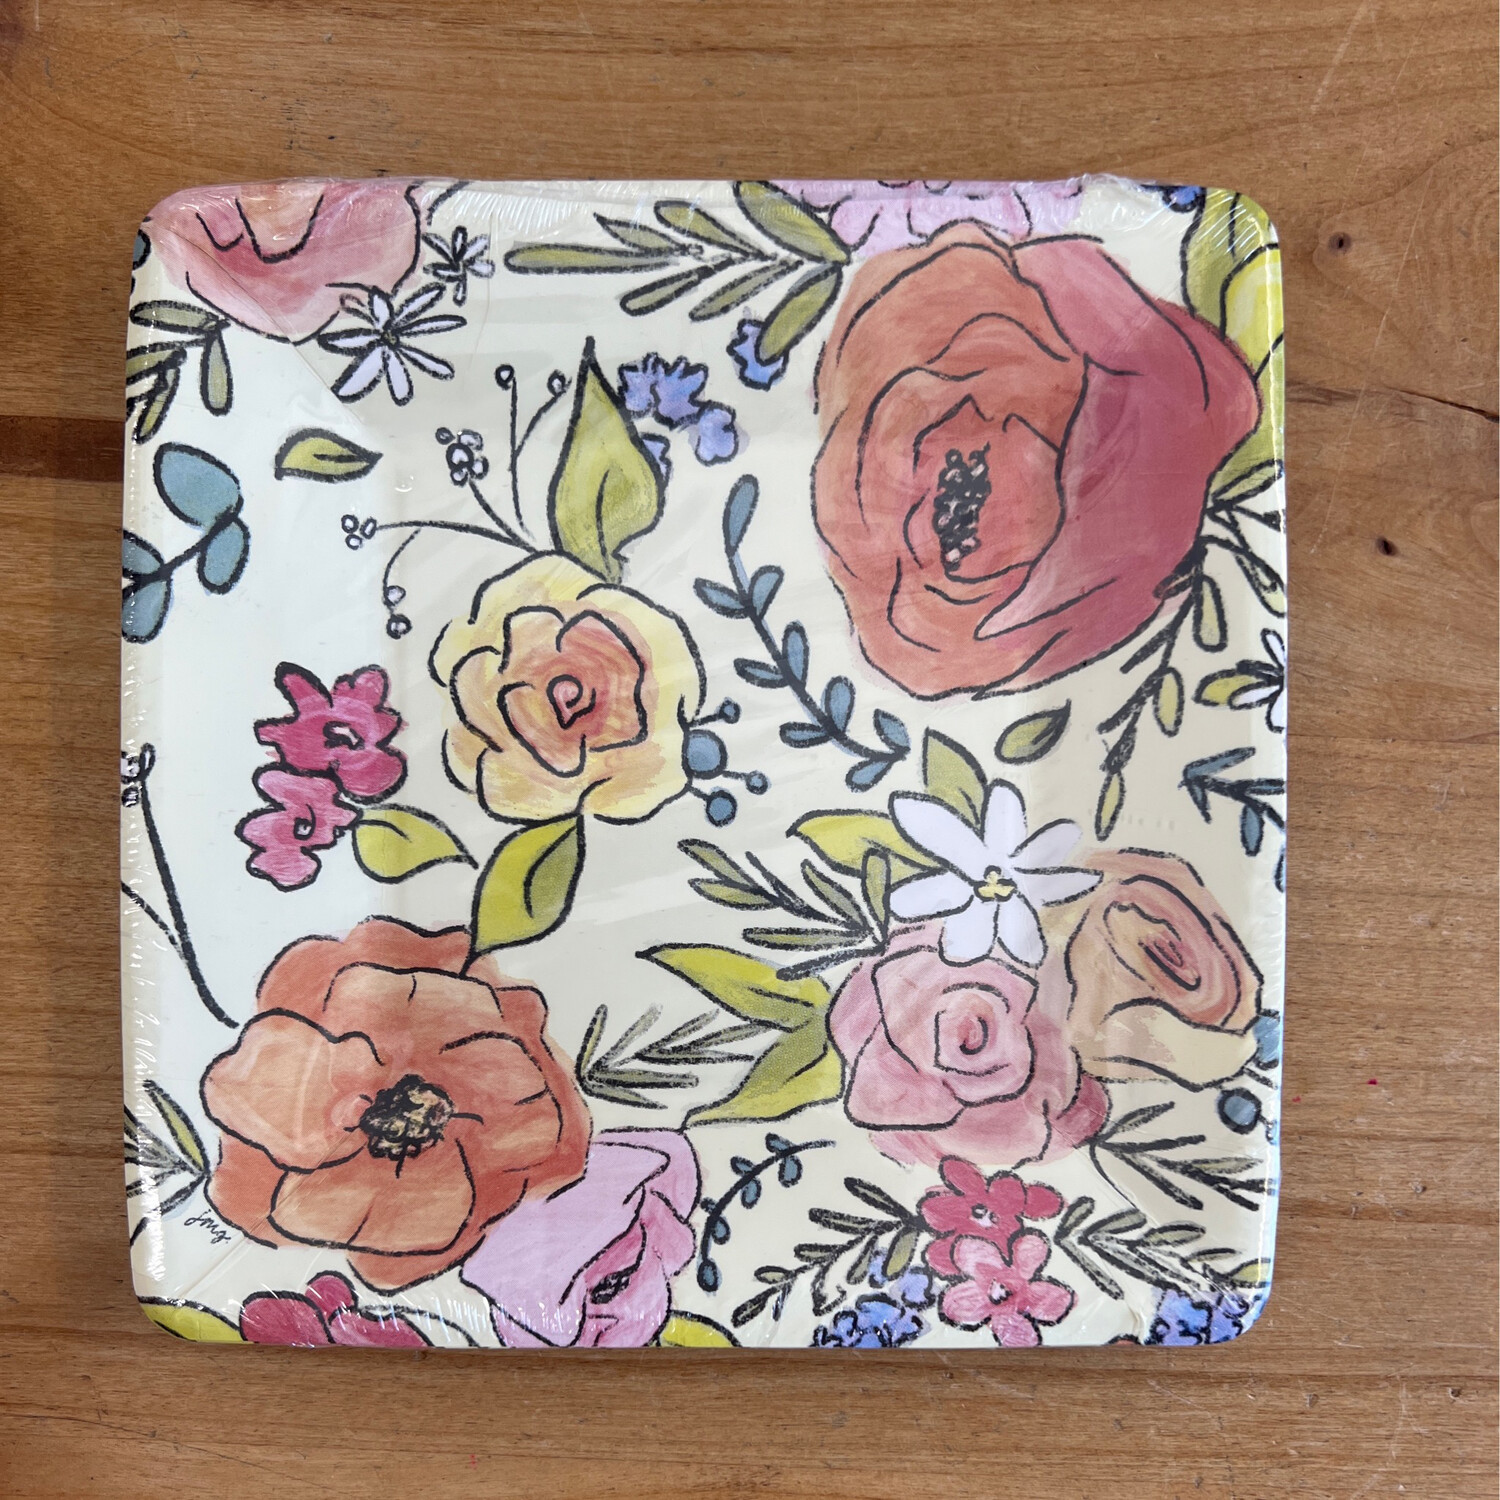 7" Square Plate -Flower Party